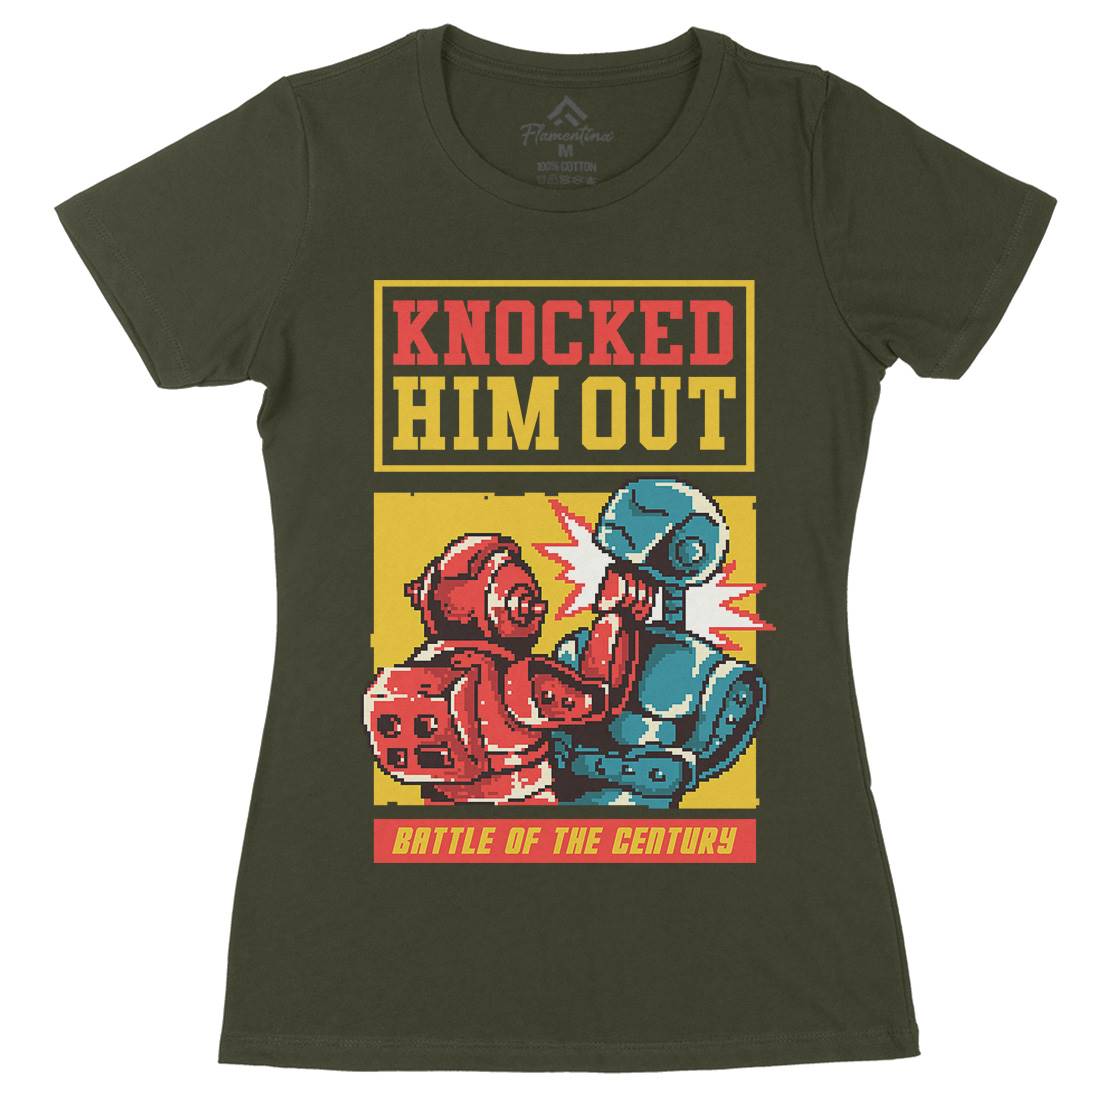 Knocked Him Out Womens Organic Crew Neck T-Shirt Space B923